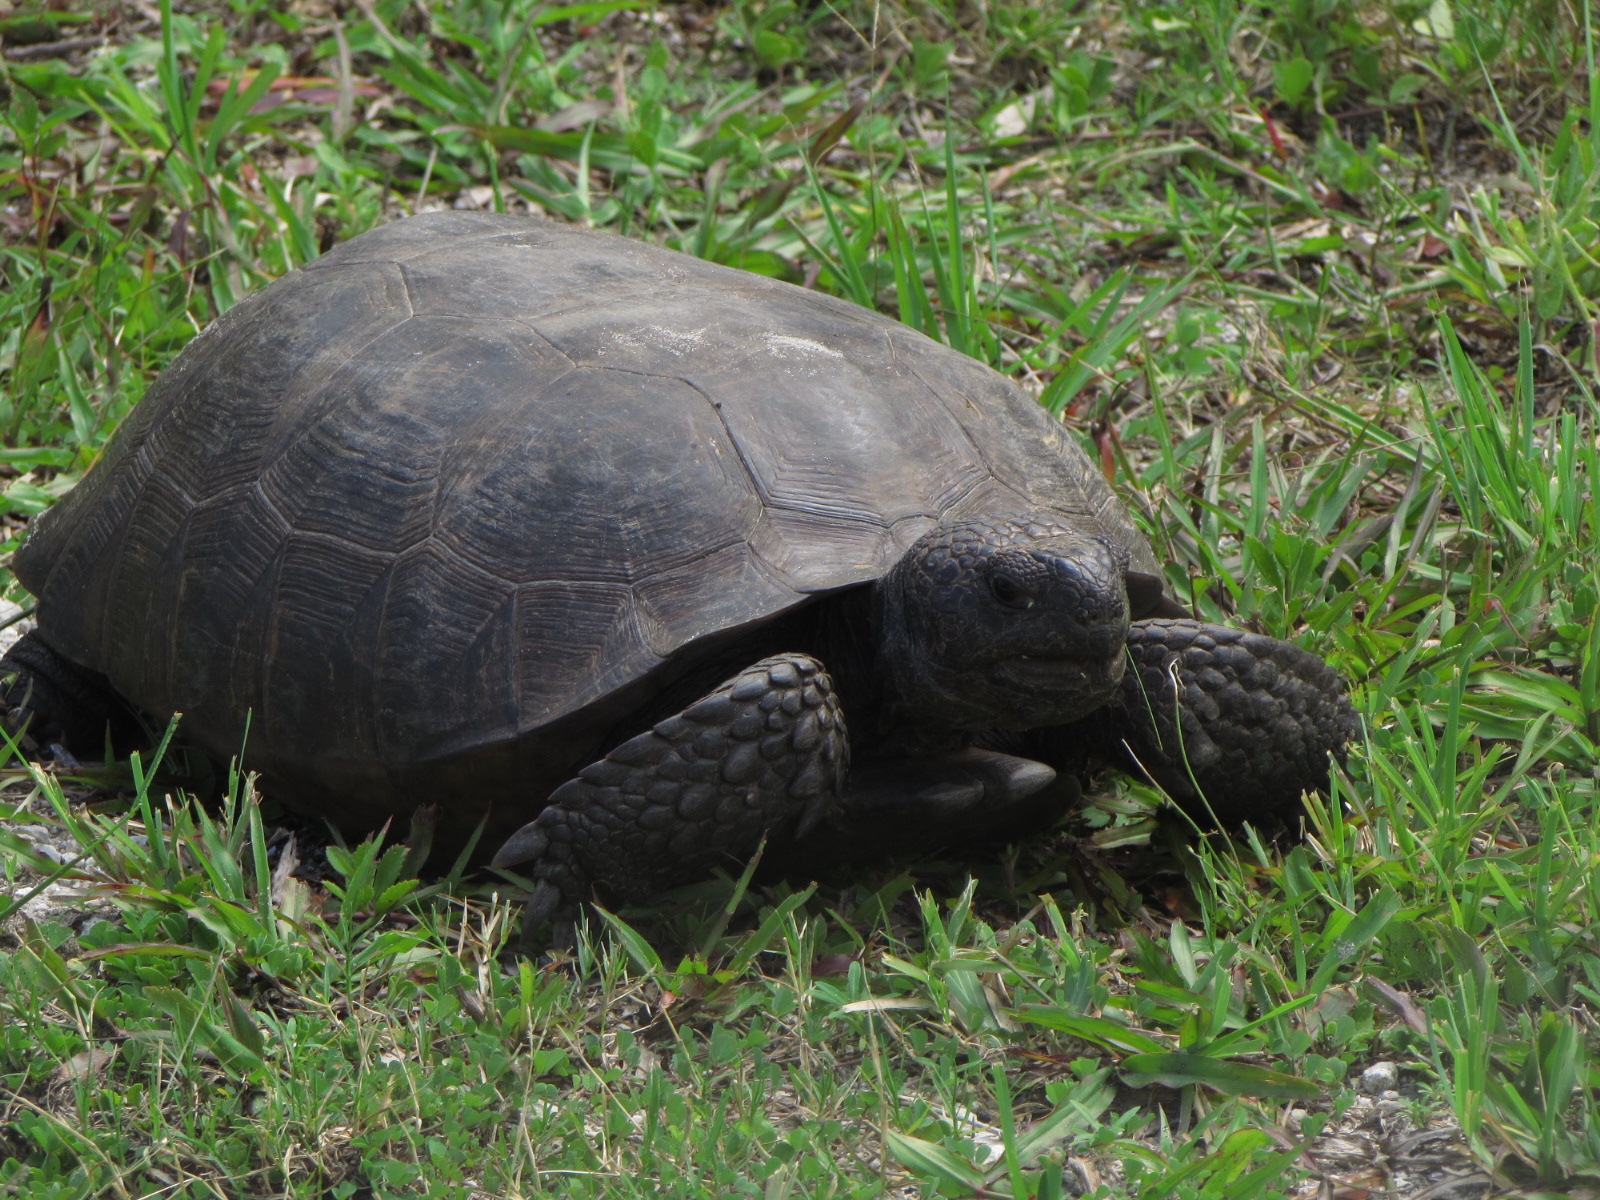 18" Giant Turtle walking in the grass at Anastasia State Park, Florida